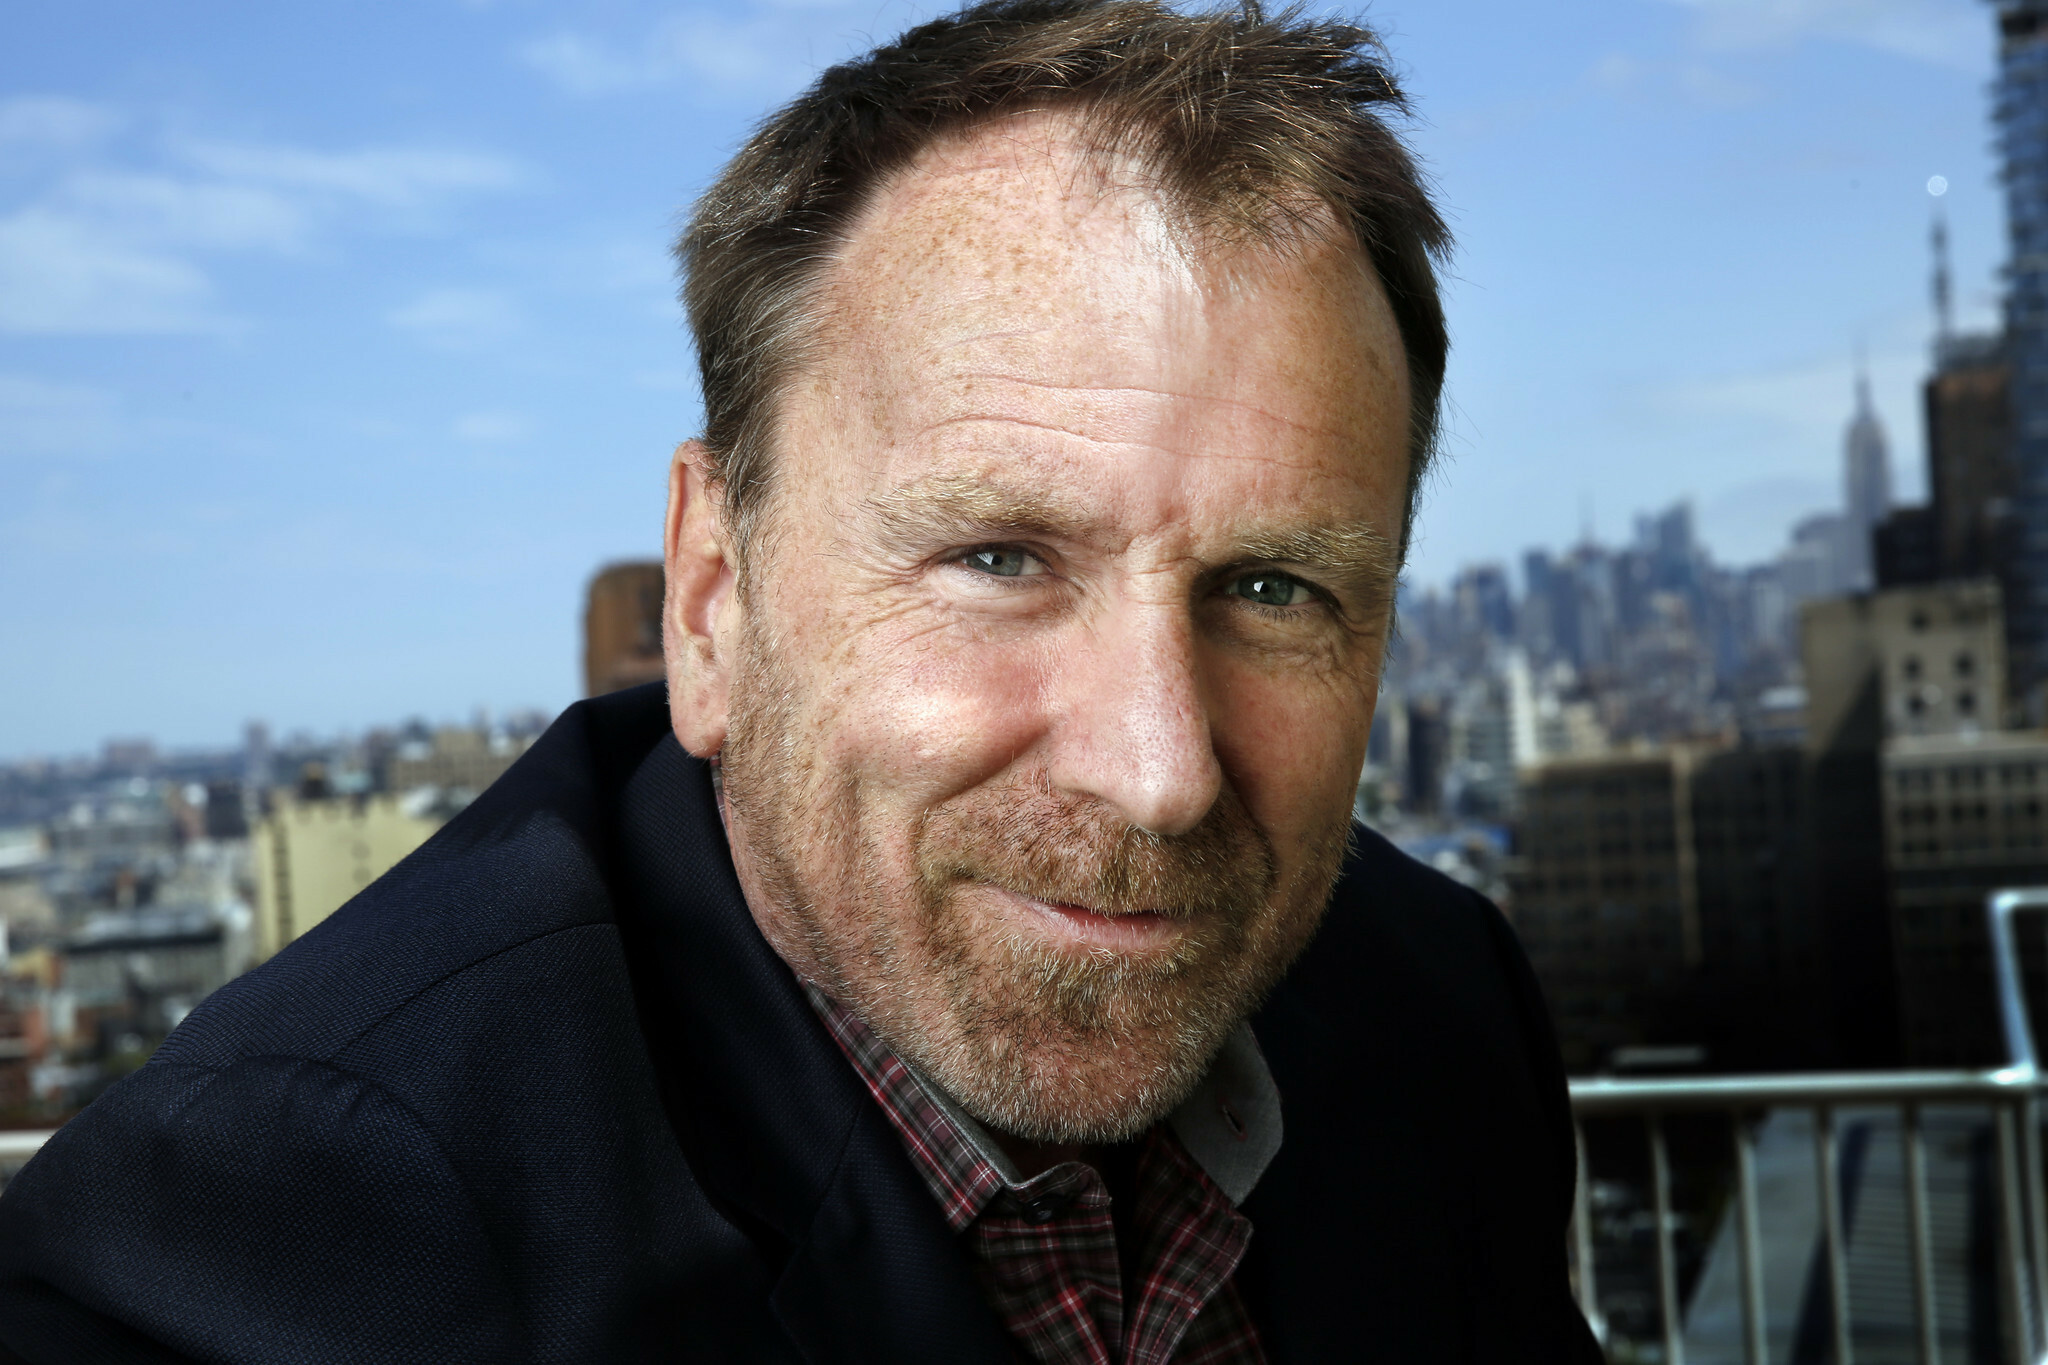 Colin Quinn will perform at Bay Street Theater in Sag Harbor on Saturday.